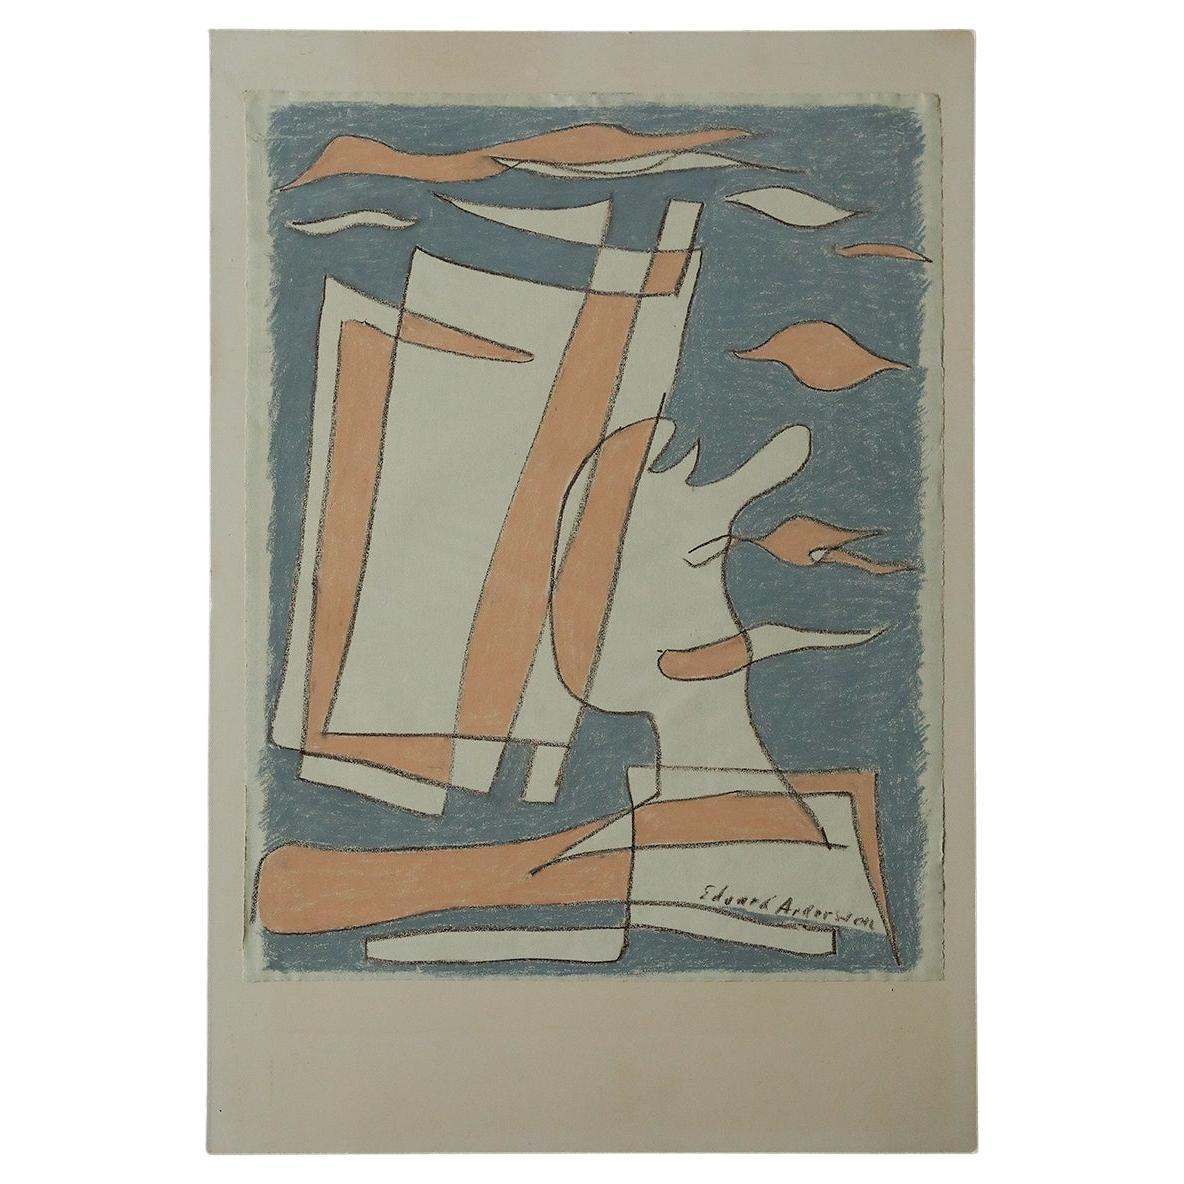 Pastel drawing by Edvard Andersson, Komposition